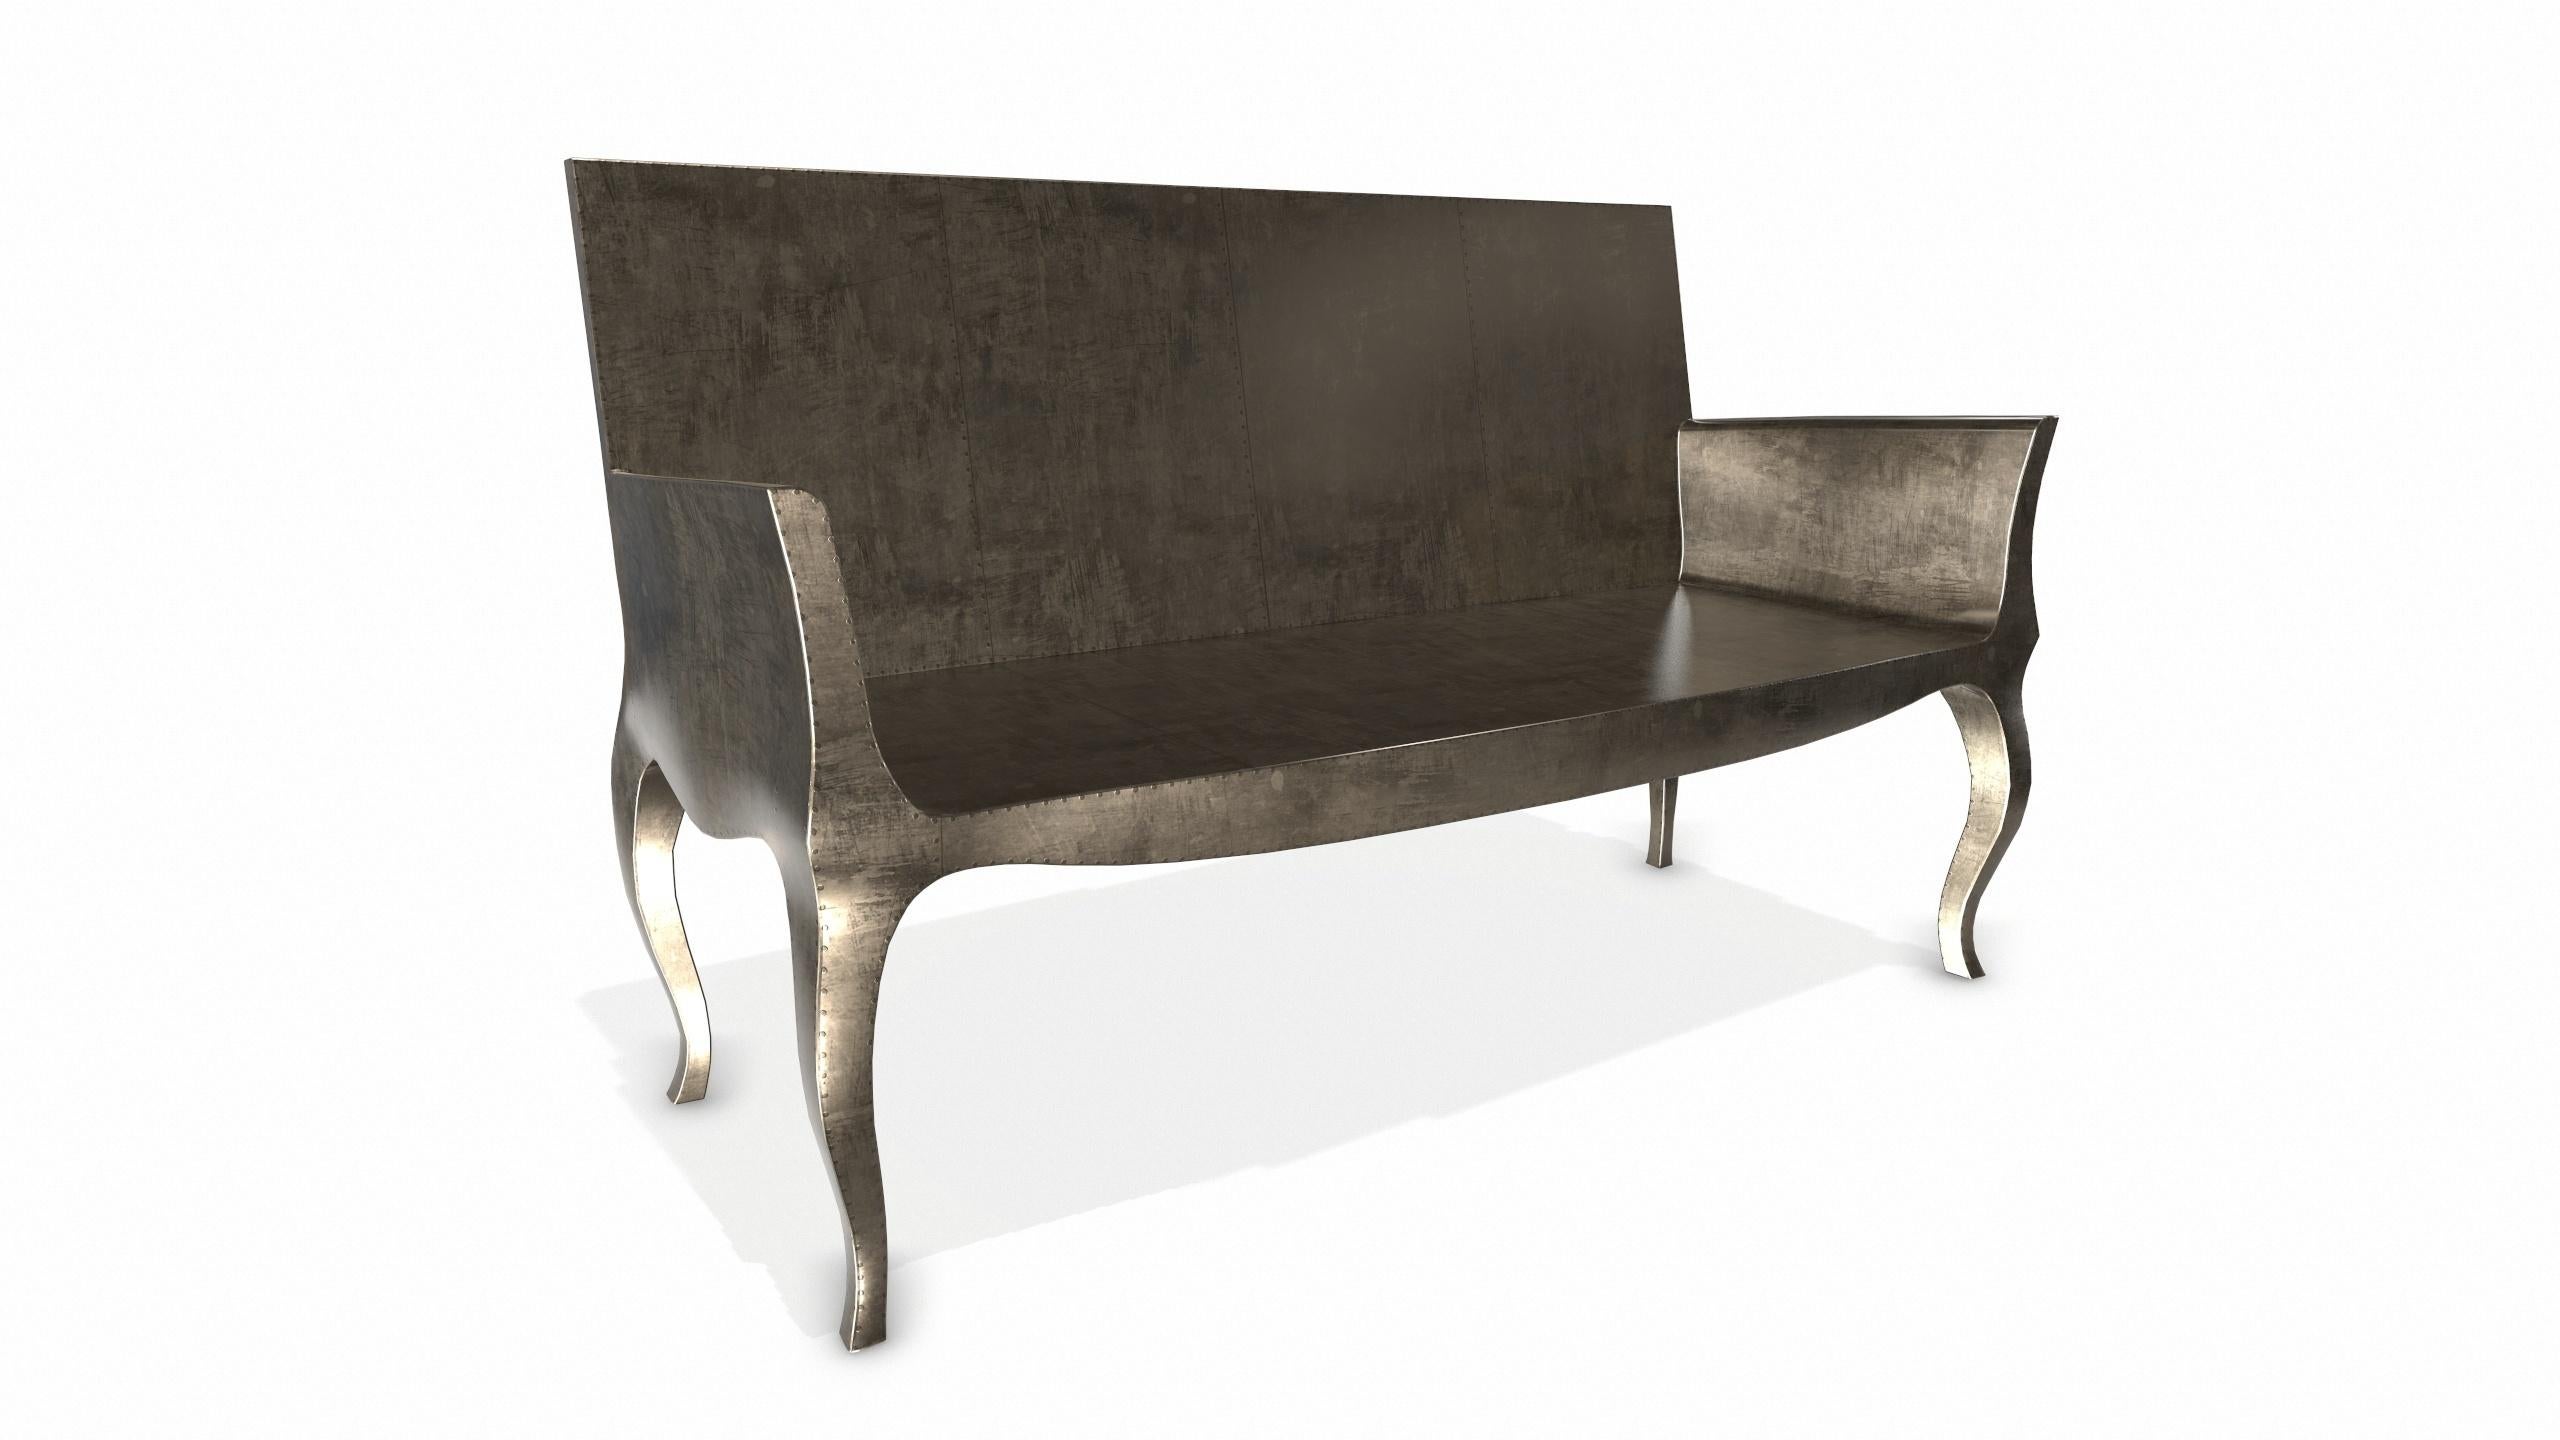 Contemporary Louise Settee Art Deco Daybeds in Smooth Antique Bronze by Paul Mathieu For Sale